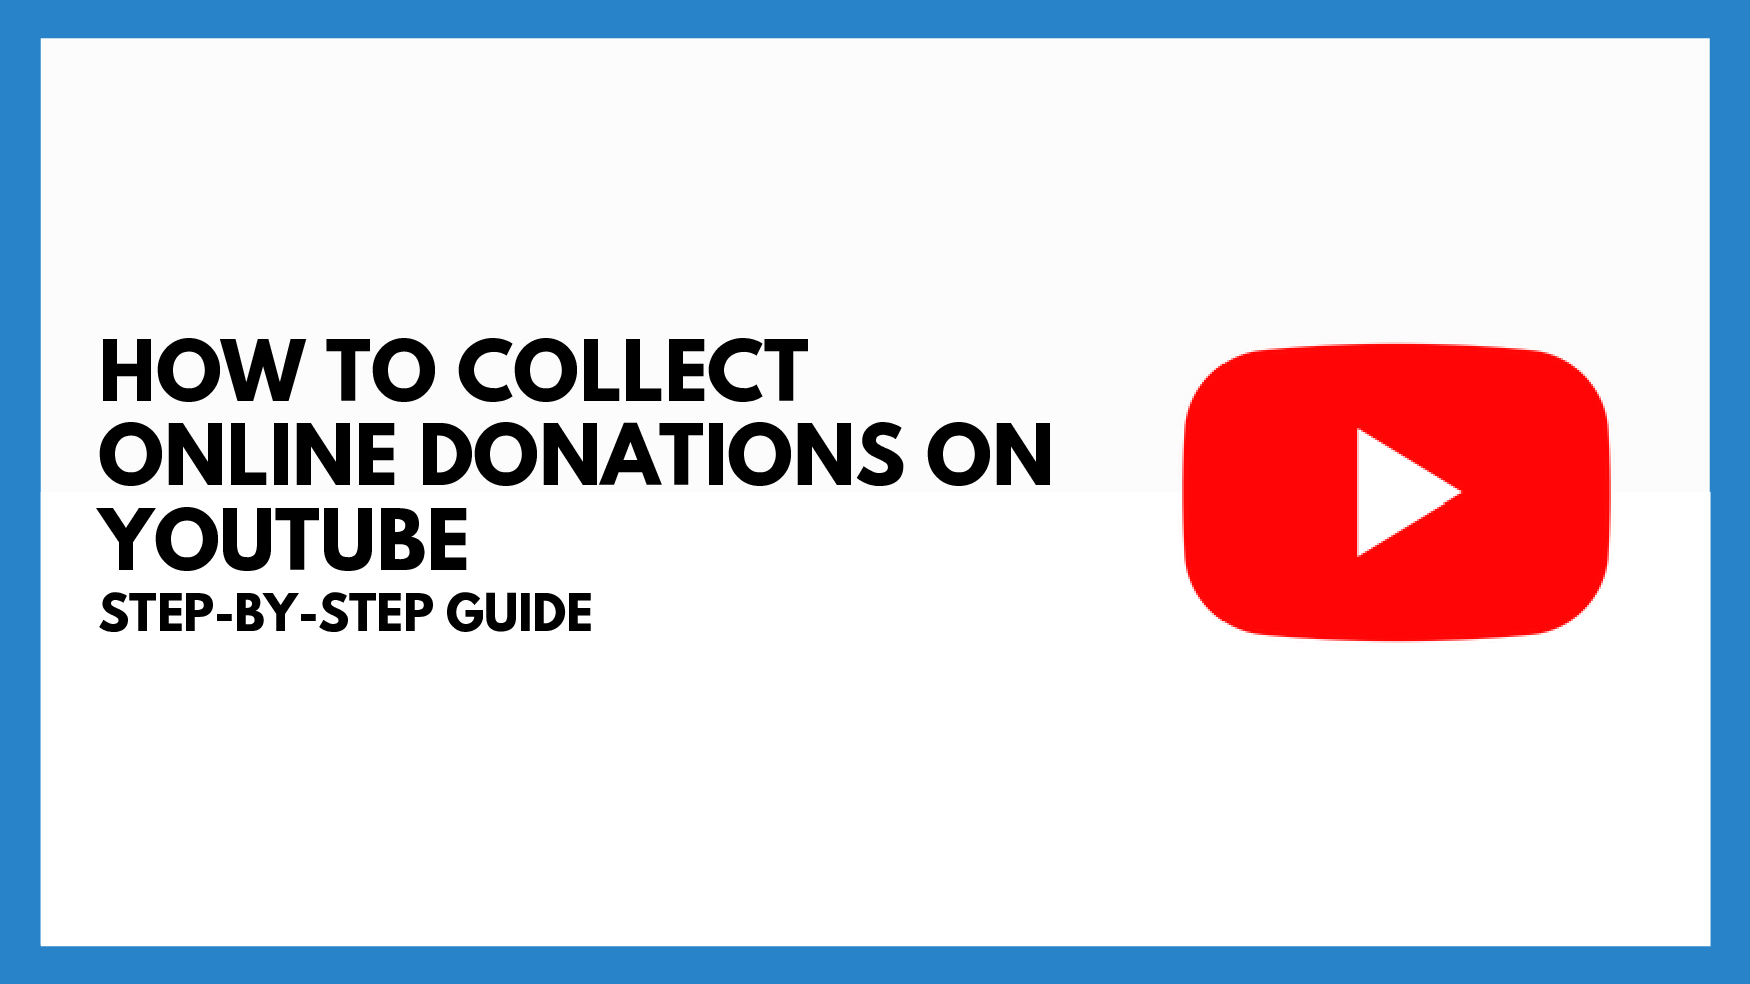 How To Collect Online Donations On YouTube: Step-By-Step Guide